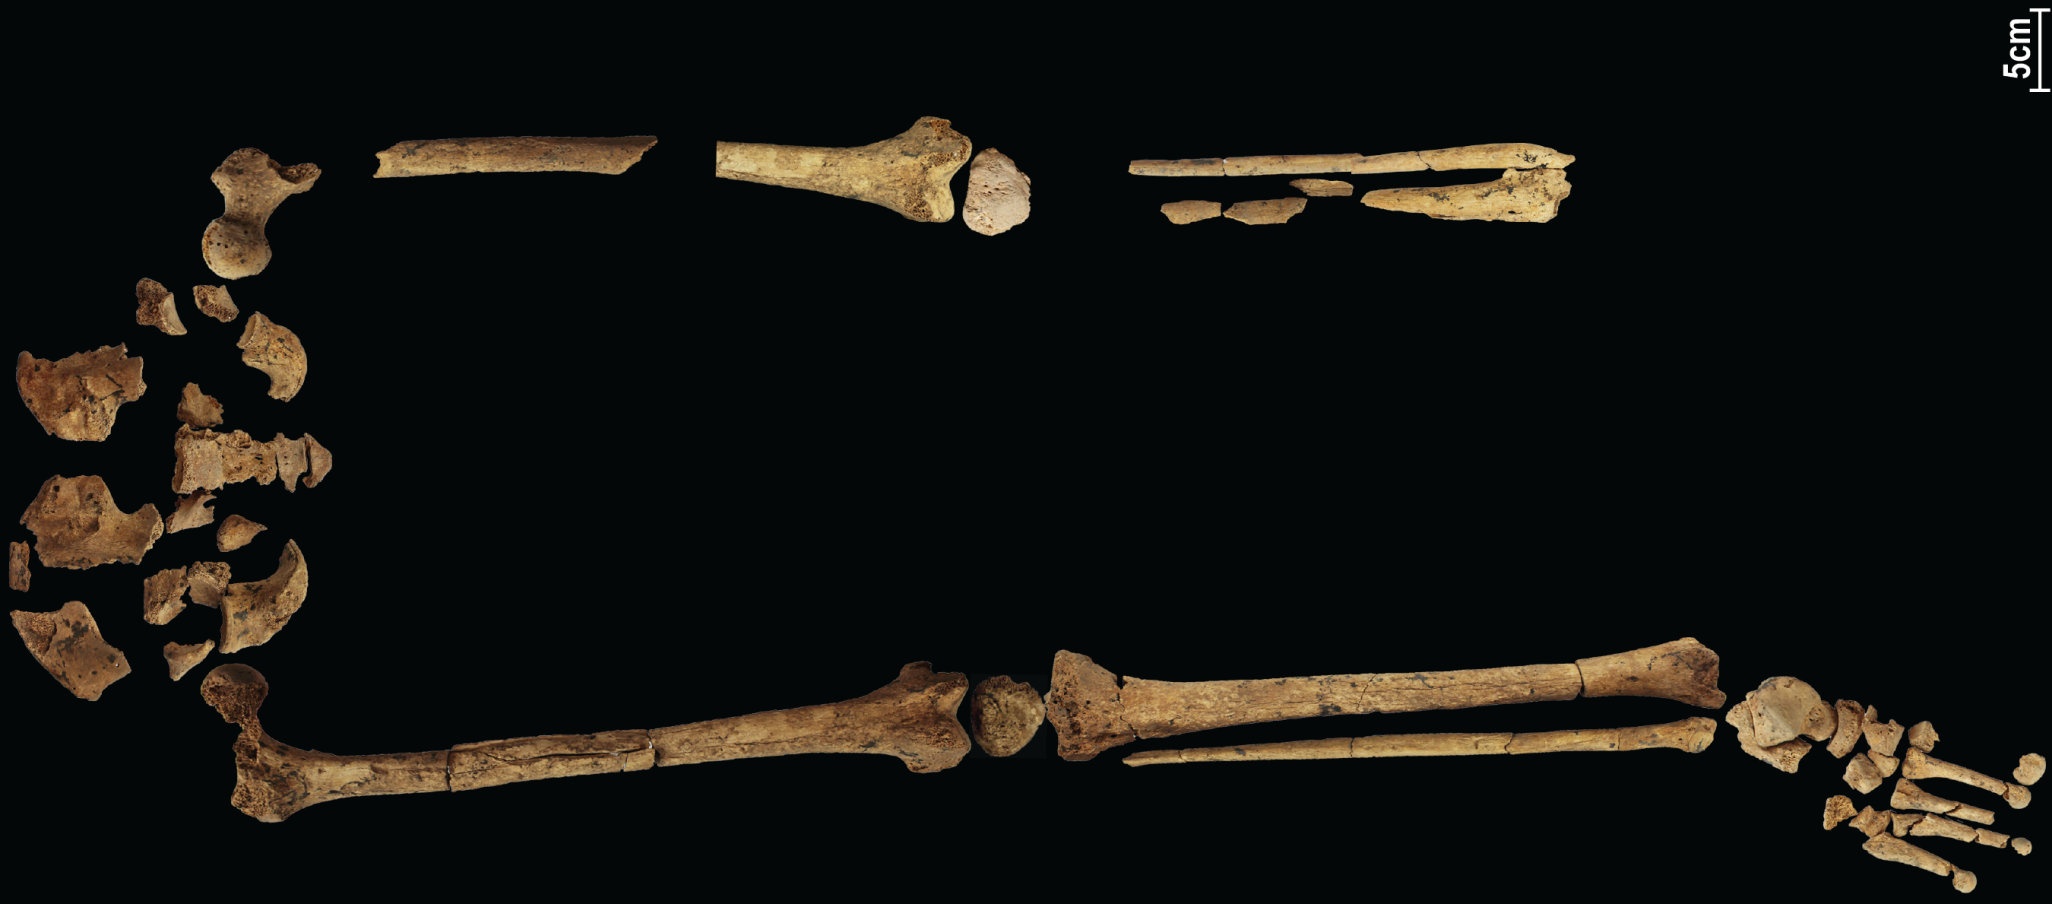 A 31,000-year-old skeleton showing the earliest known complex surgery could rewrite history! 4